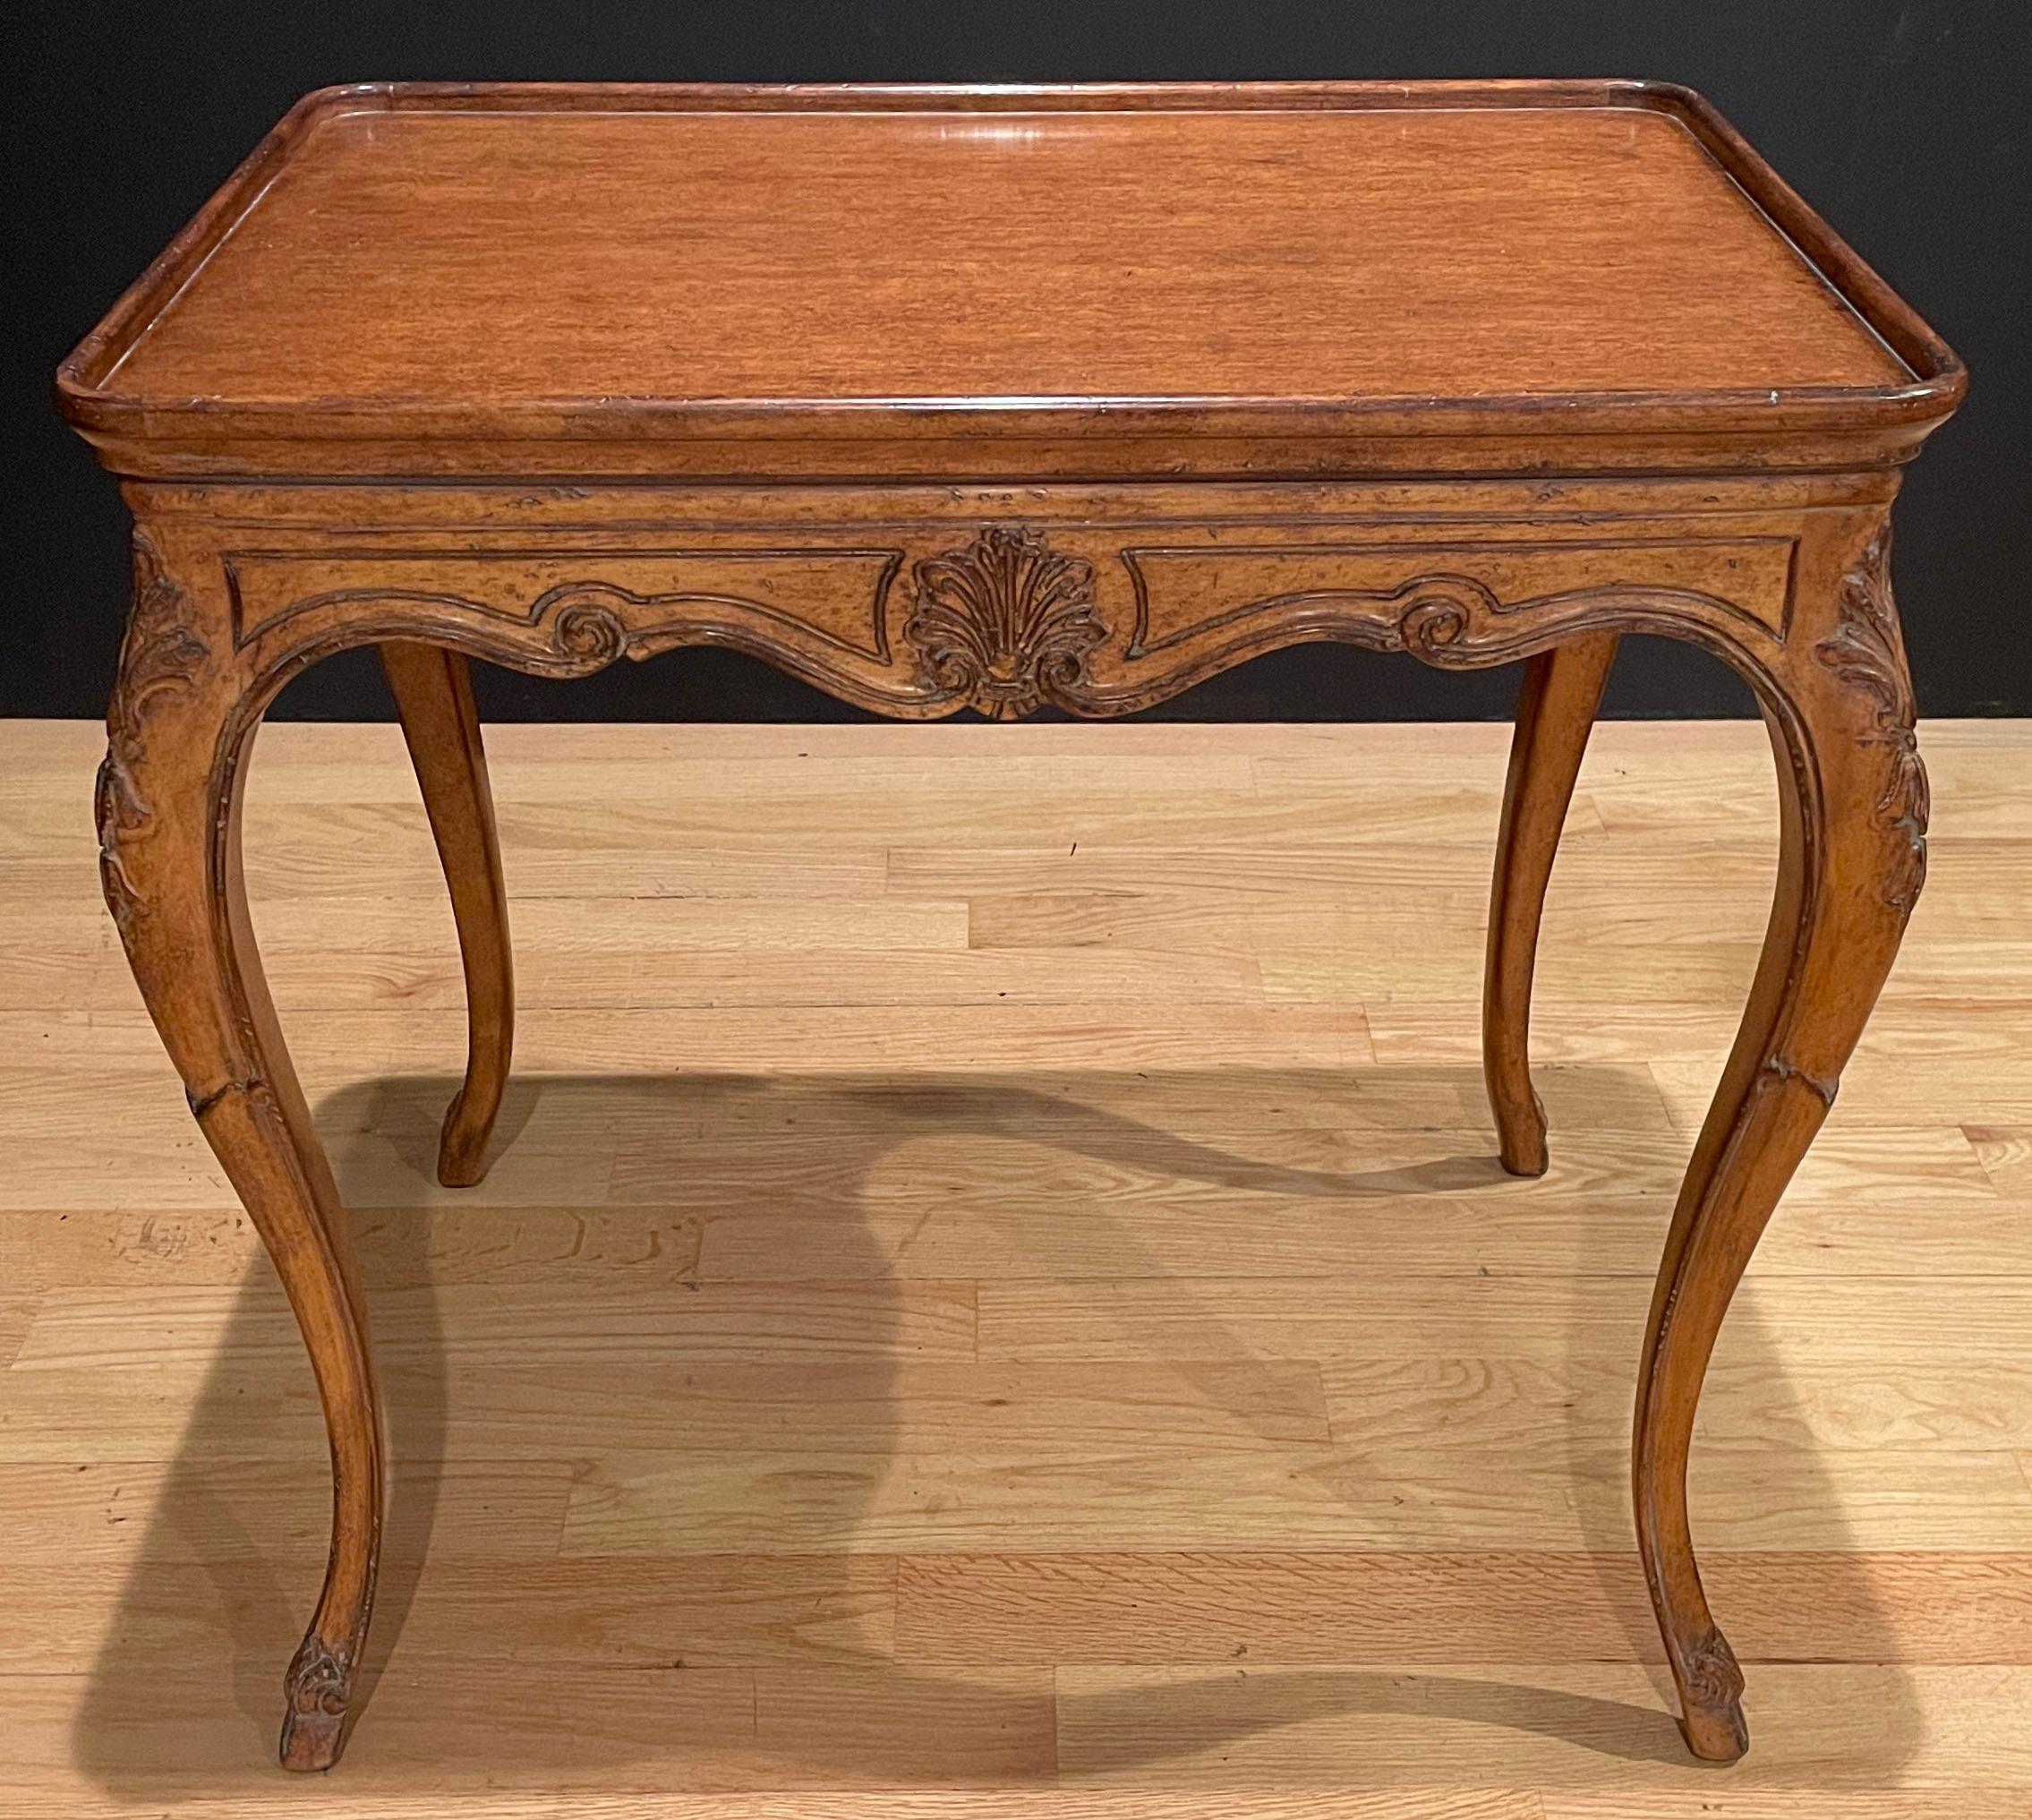 Provincial French carved fruitwood Louis XV style side table. Country French styling with raised tray form top panels and carved elements on apron and cabriole legs.